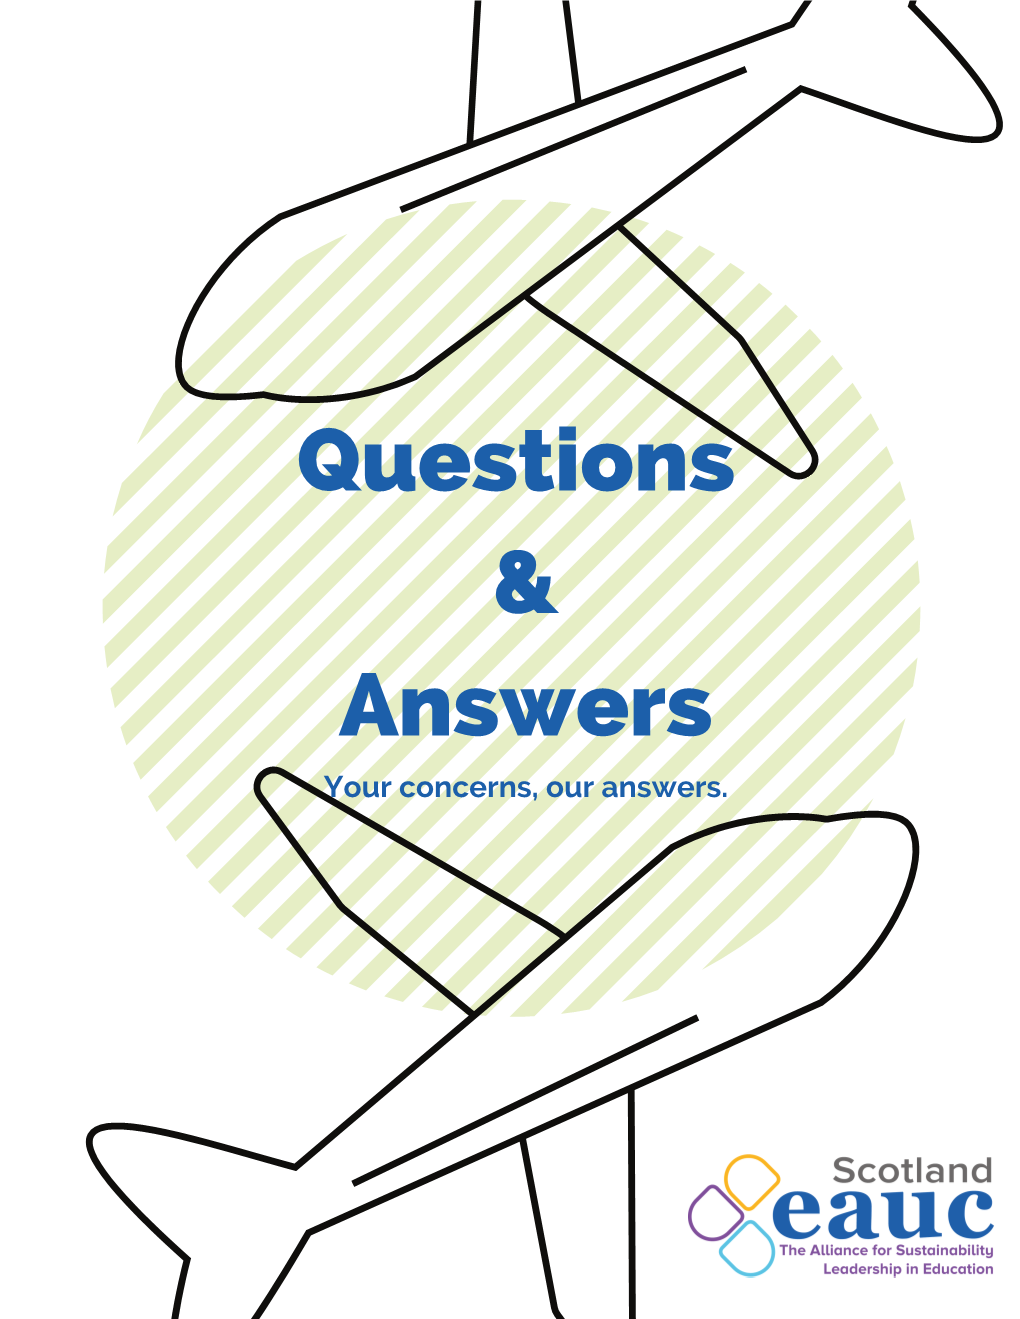 Questions & Answers Tool